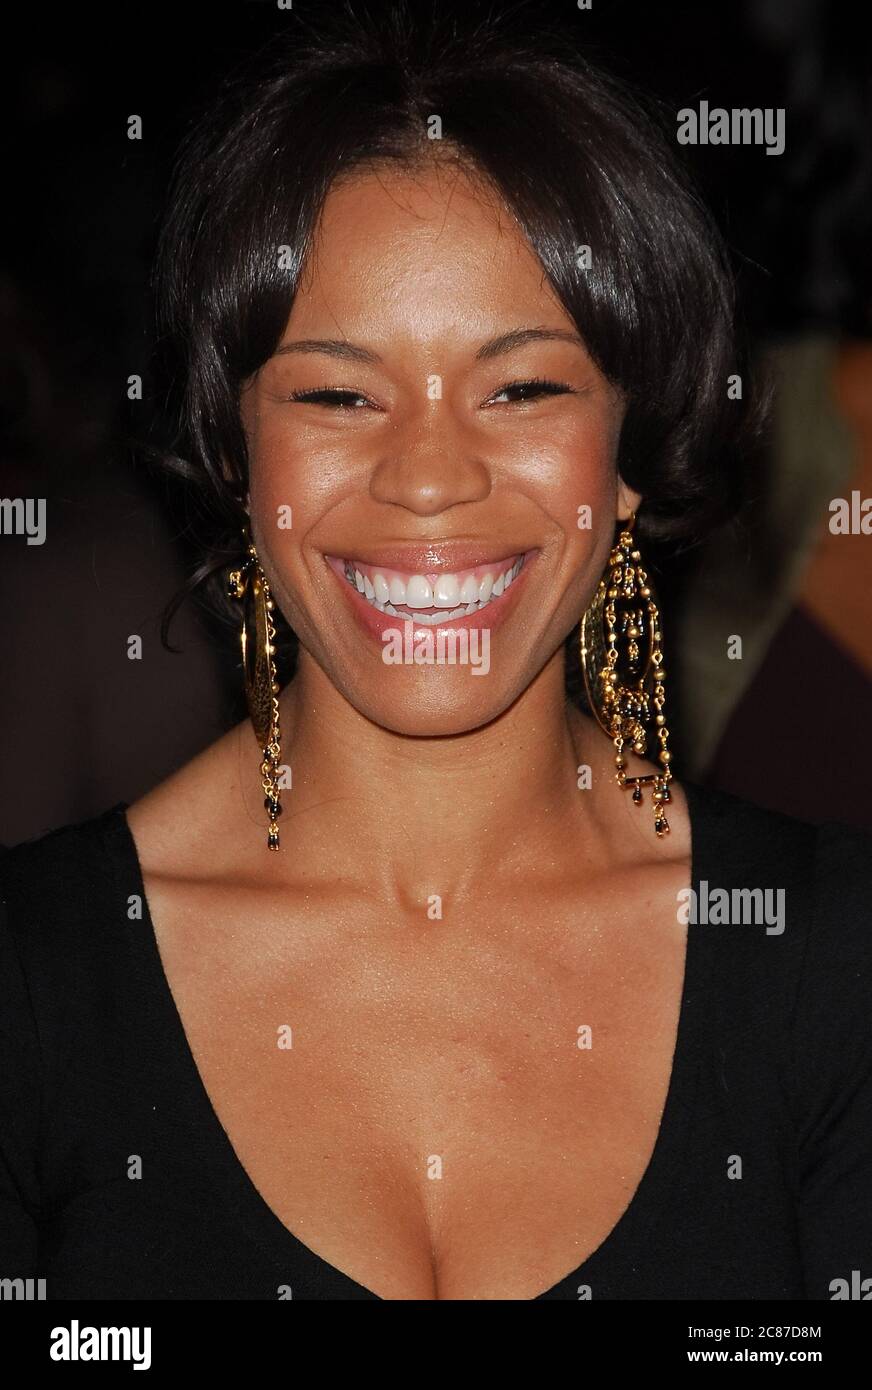 Alexis Fields at the Premiere of 'Somebody Help Me' held at the Grauman's Chinese Theater in Hollywood, CA. The event took place on Thursday, October25, 2007. Photo by: SBM / PictureLux- File Reference # 34006-9096SBMPLX Stock Photo